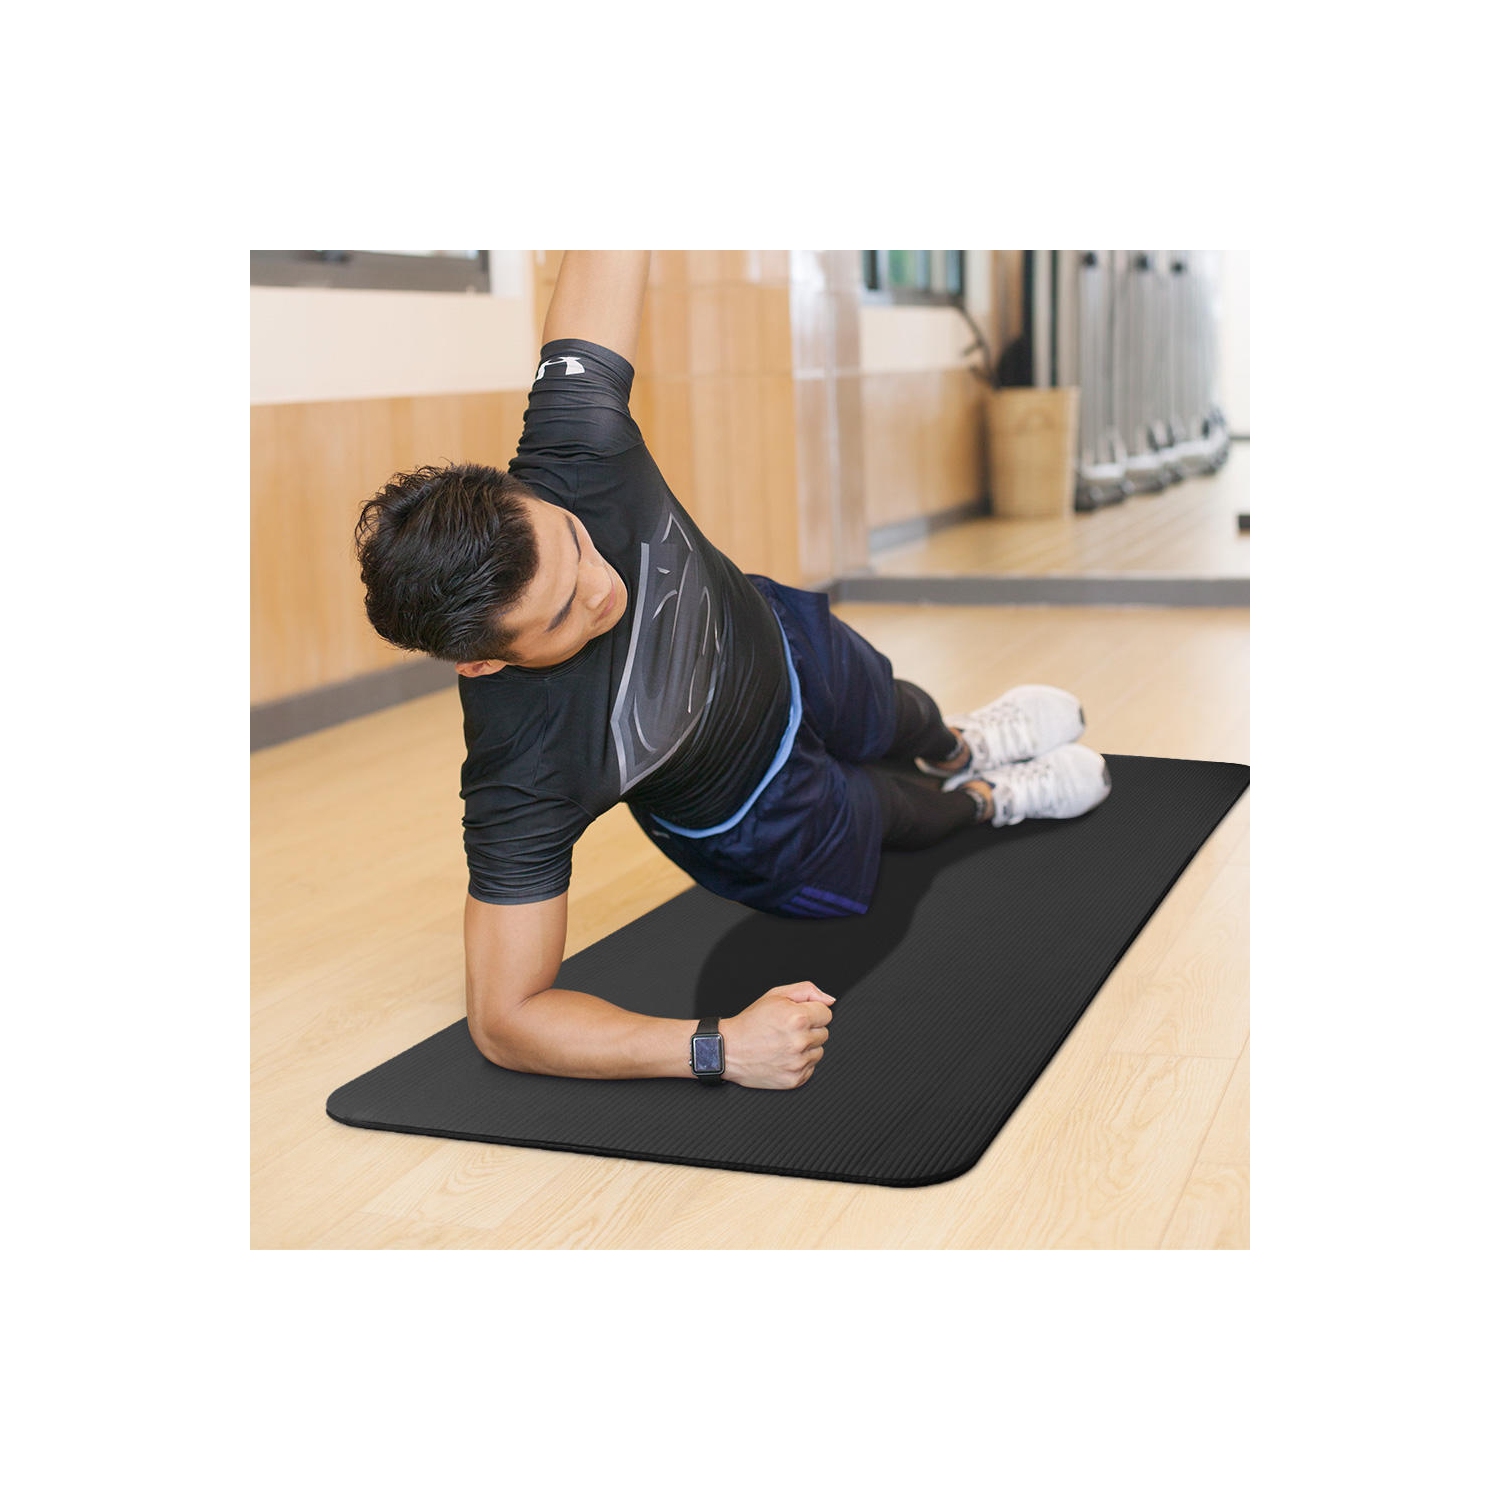 Extra Thick Exercise Yoga Gym Floor Mat with Carrying Strap - 74 x